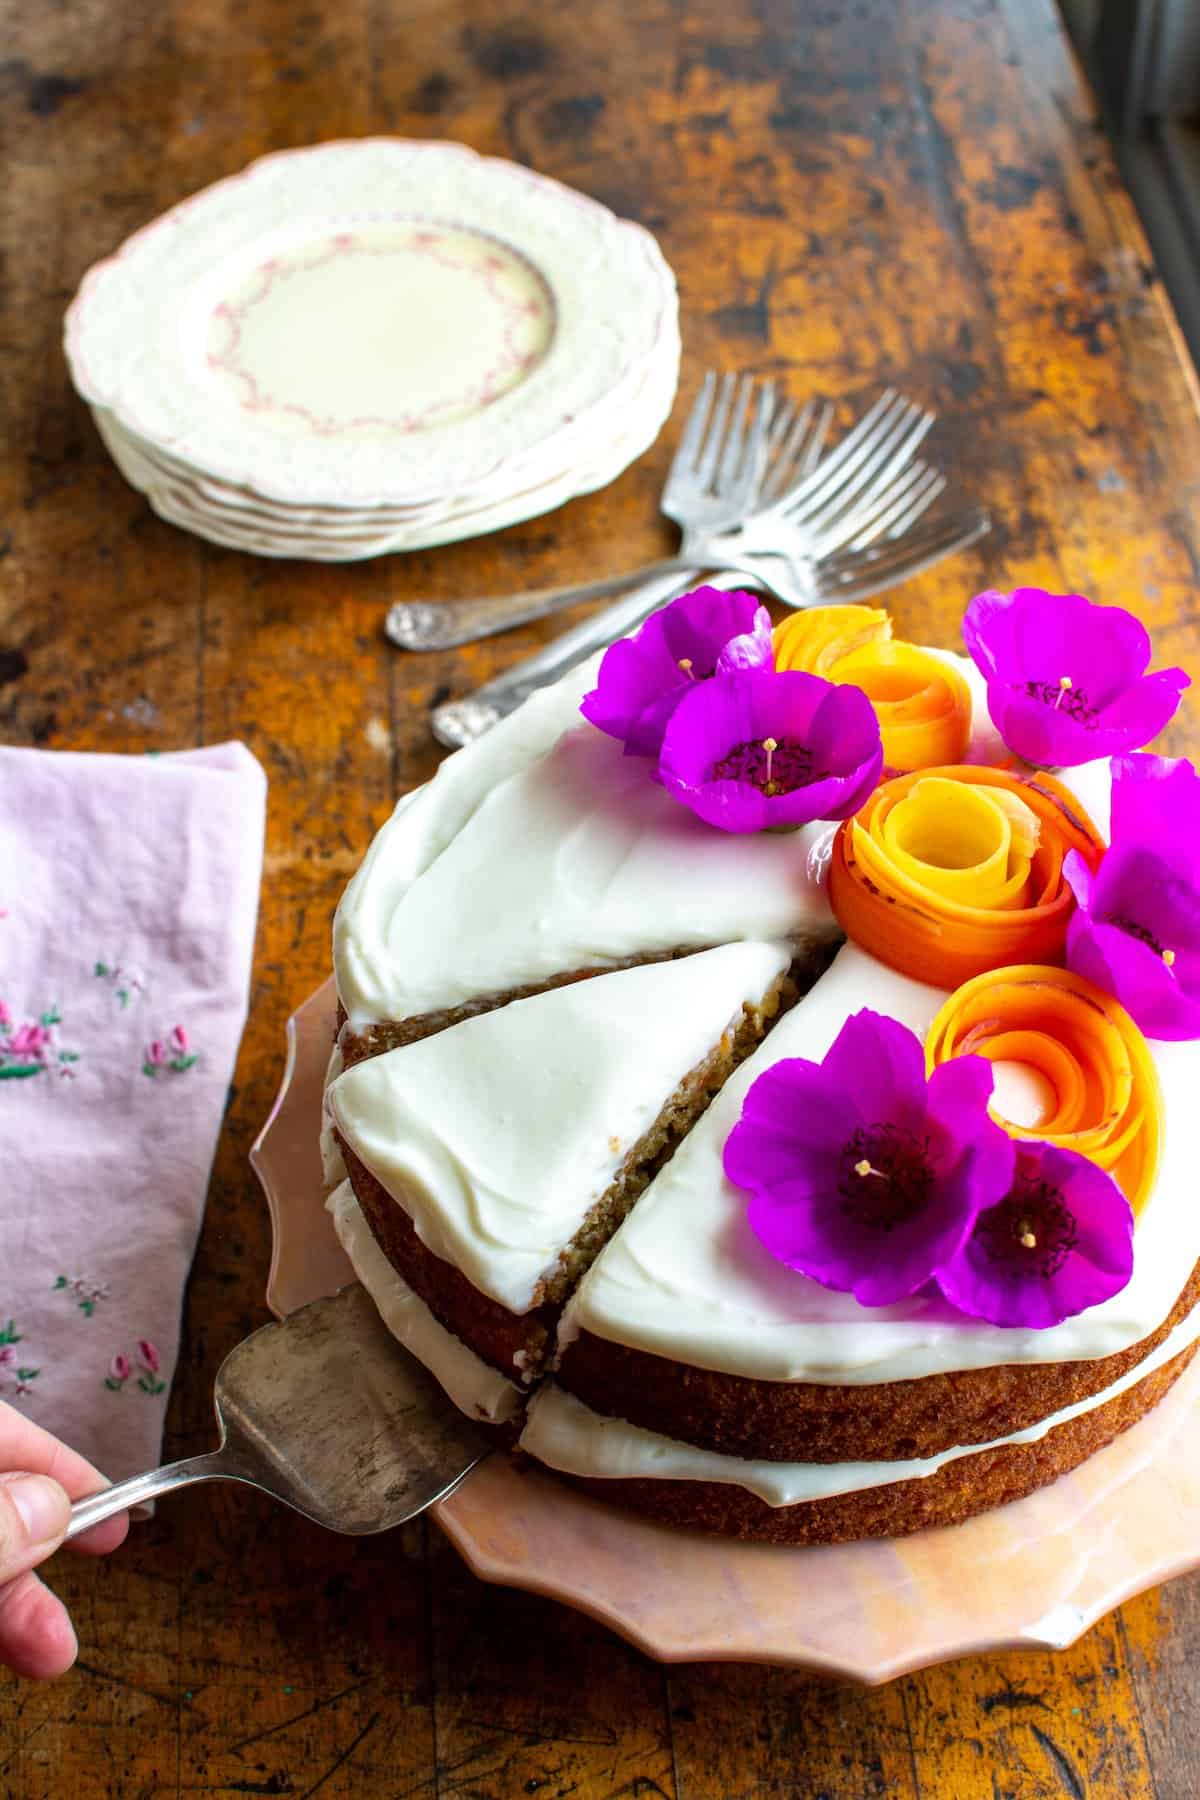 A woman removing a piece of cake from a carrot cake topped with spirals of carrots and purple flowers.